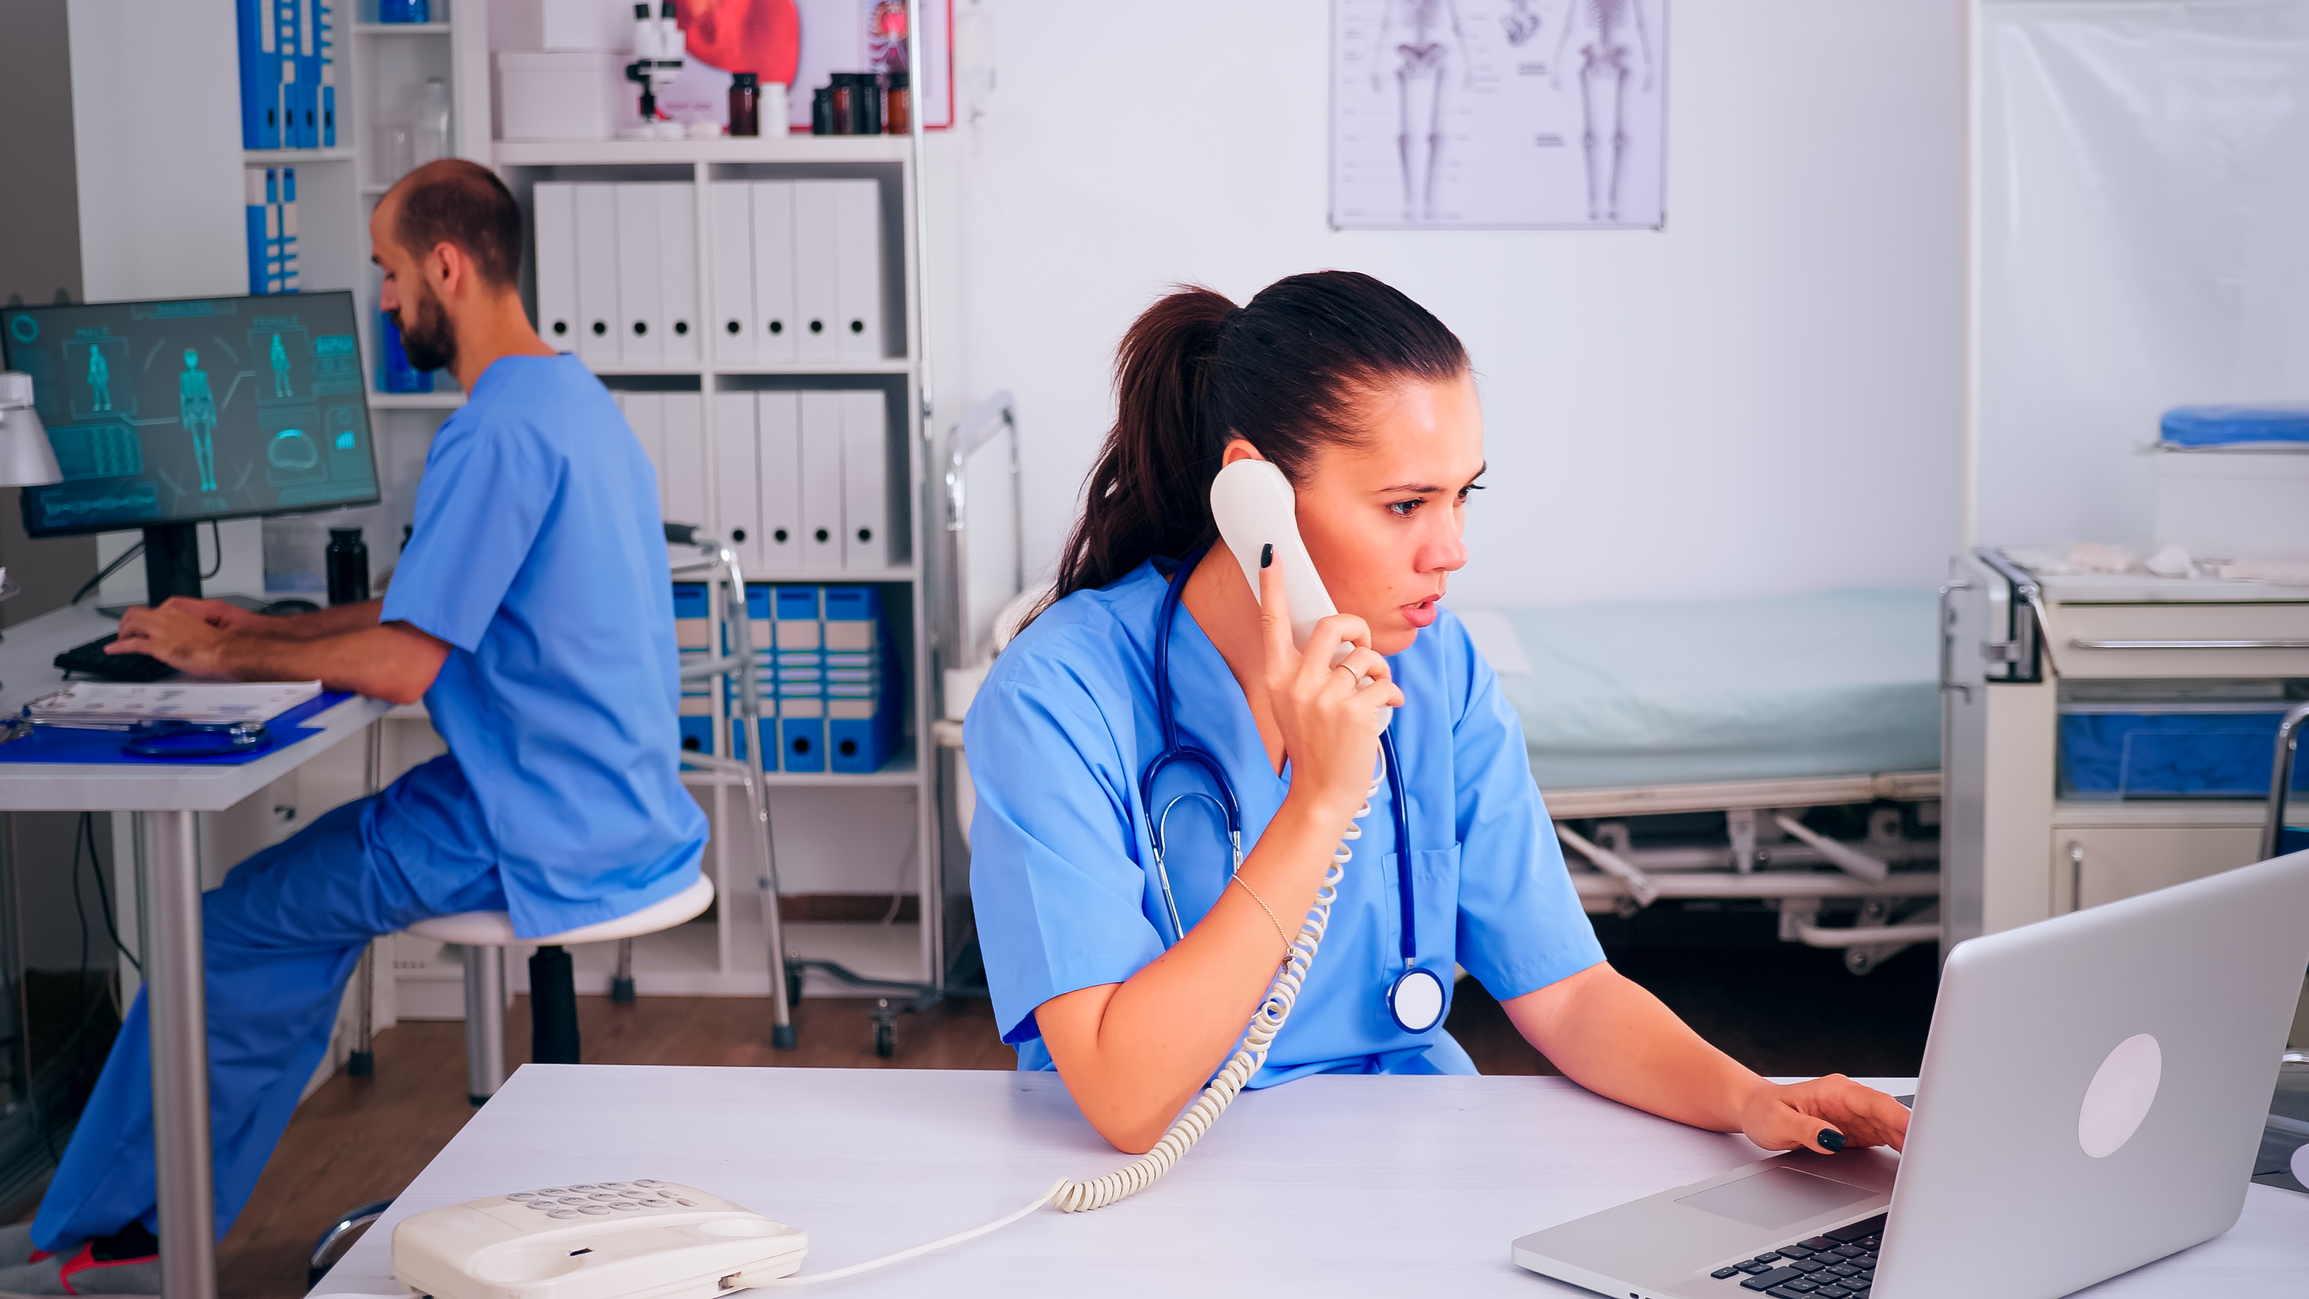 Patient Experience: Overcoming Communication Challenges in Healthcare Through Omnichannel Solutions